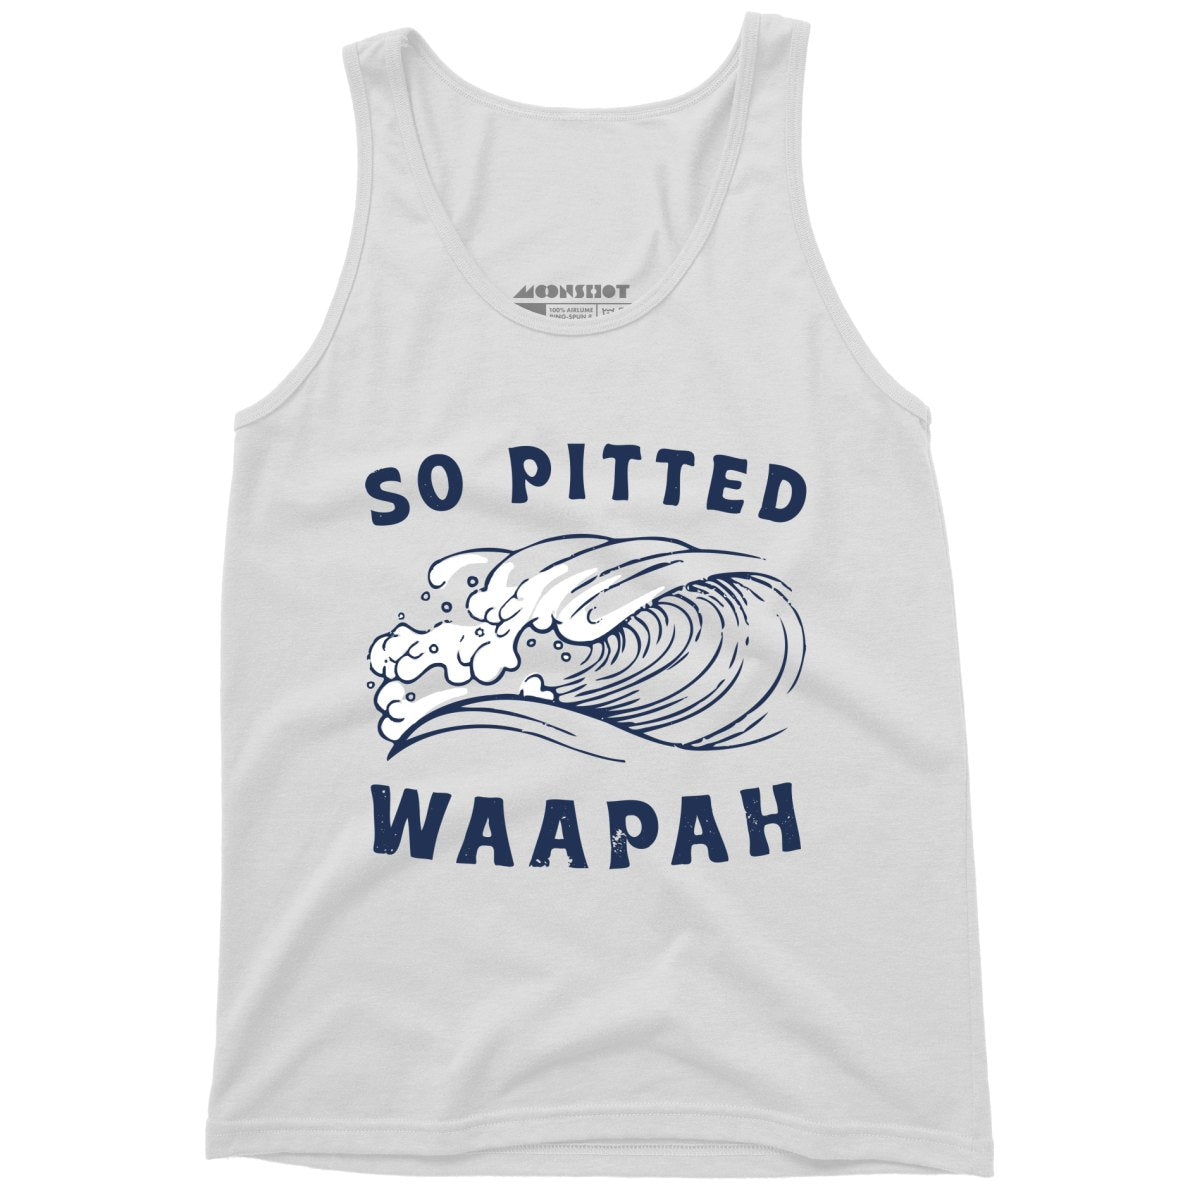 So Pitted - Unisex Tank Top